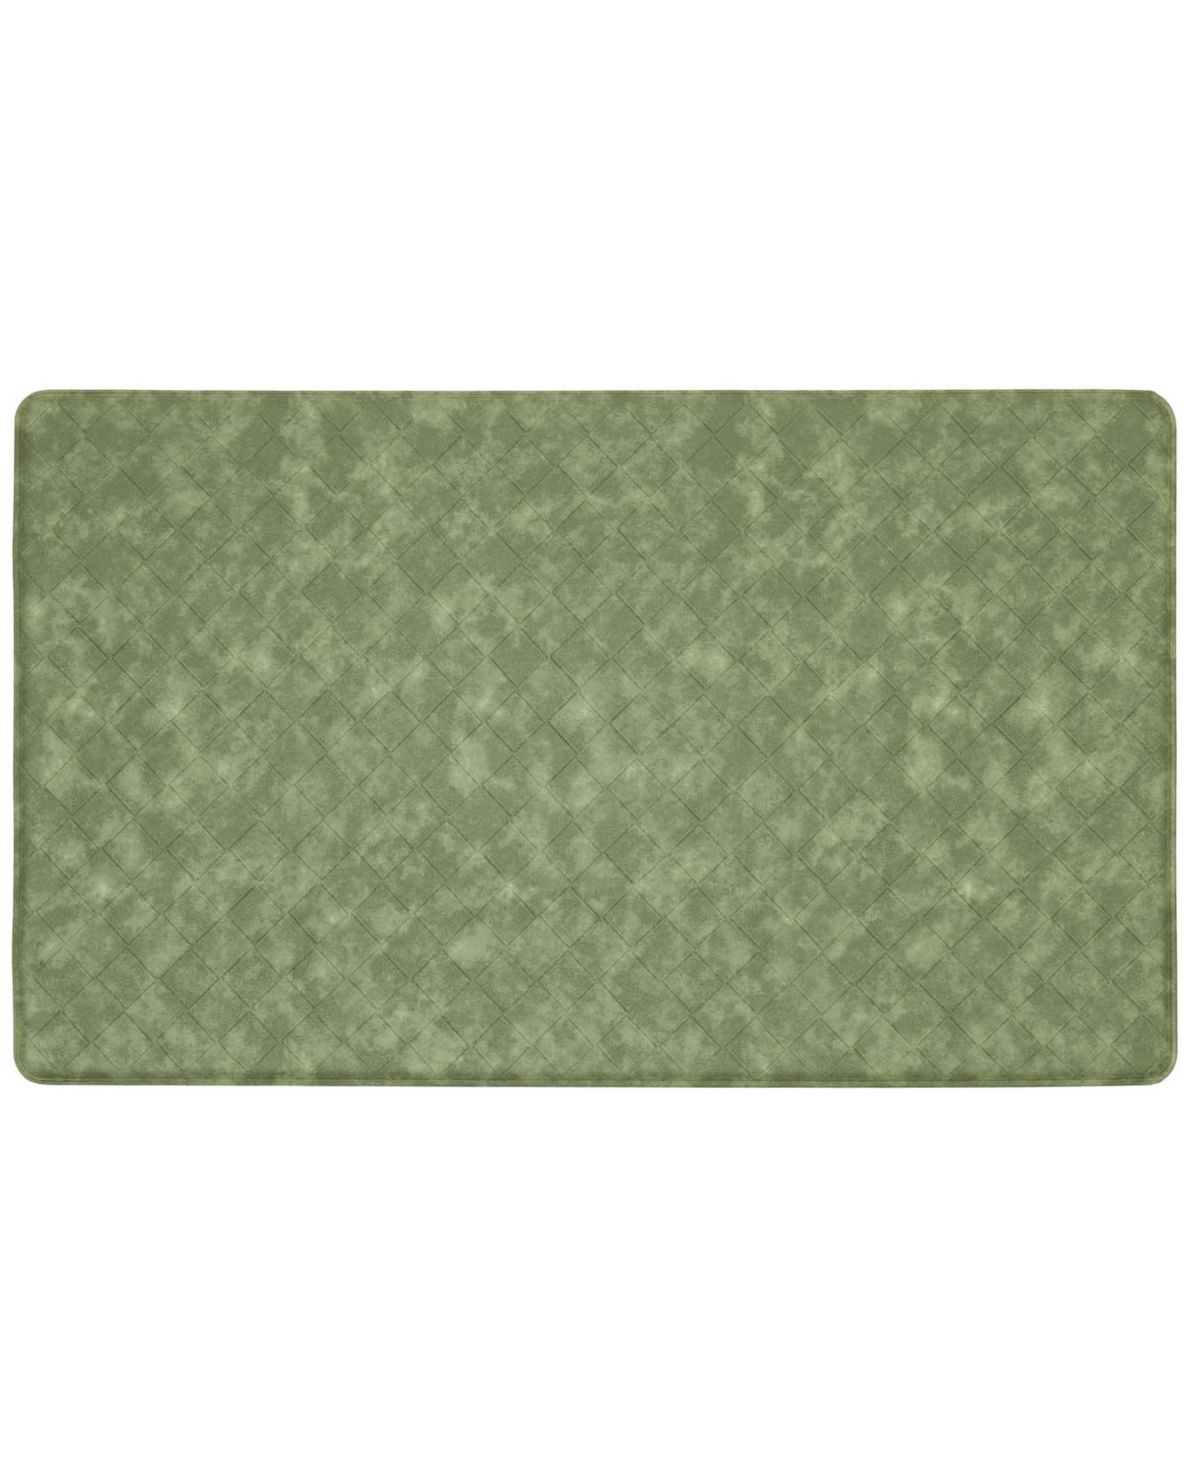 Tommy Bahama 20" X 36" Printed Polyvinyl Chloride Fatigue-resistant Mat In Green Wide